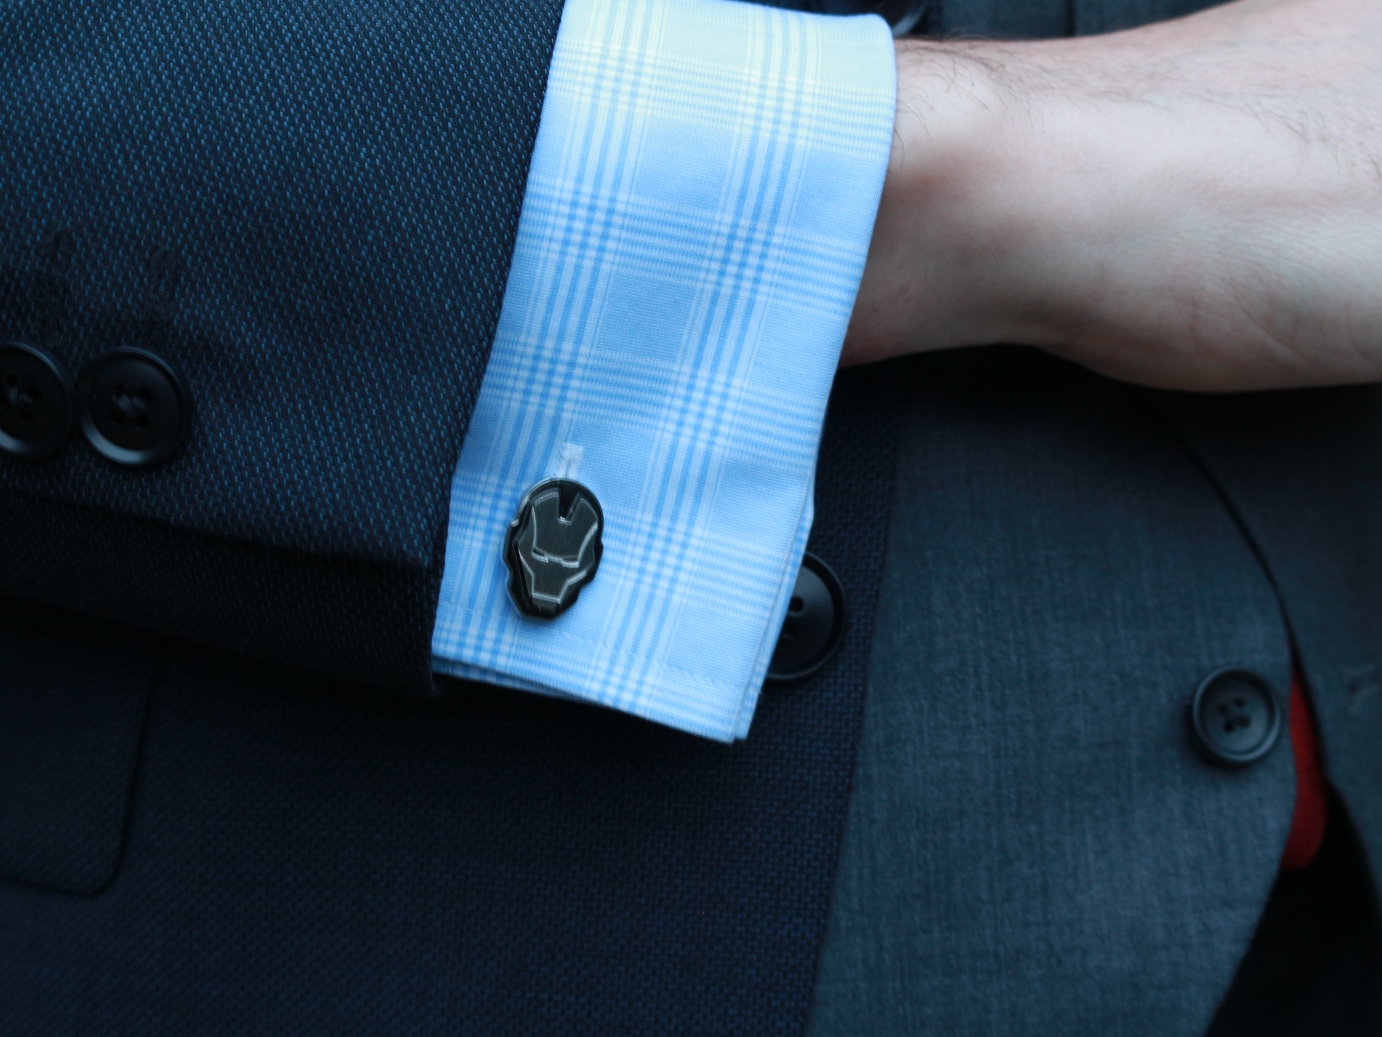 Outfit of the week #1 - Iron Man Cufflinks